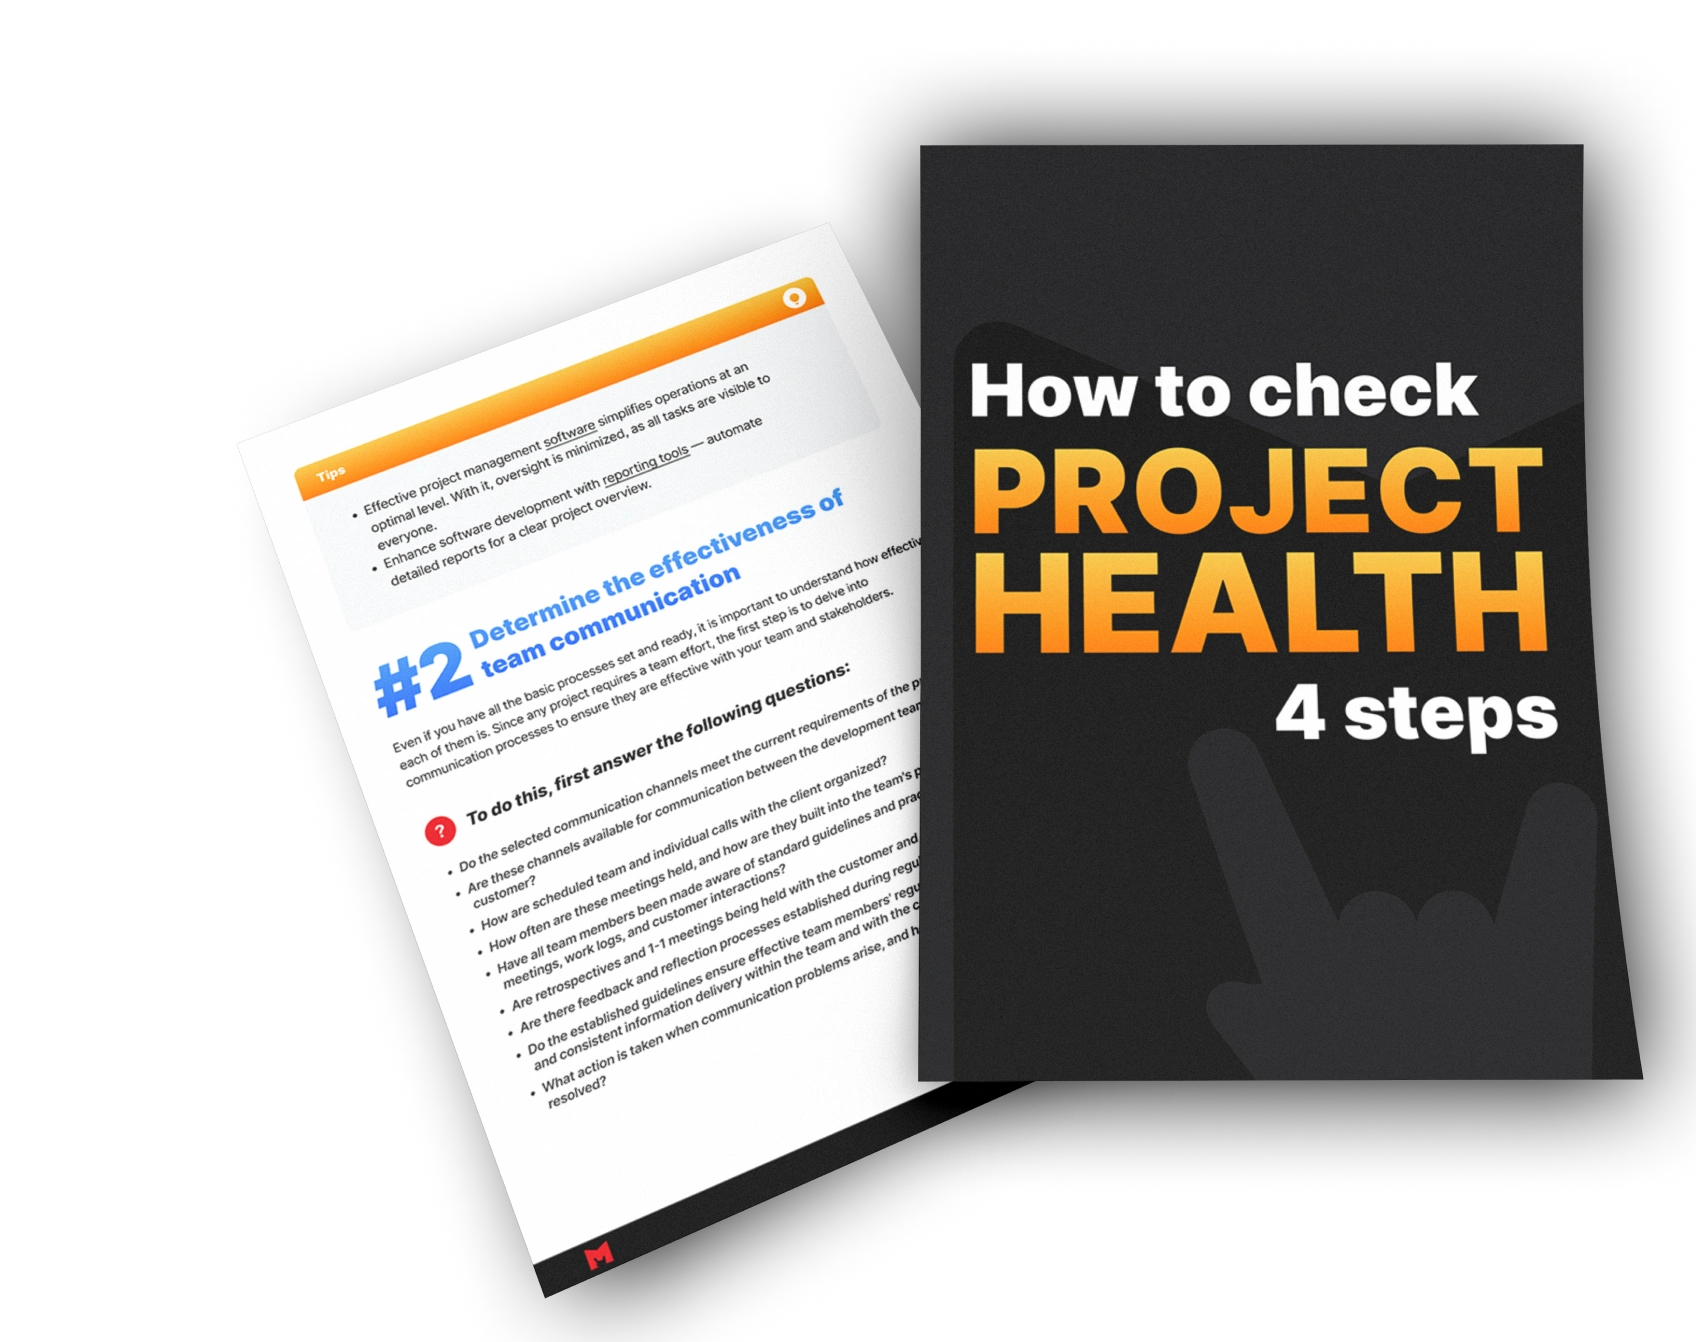 How to check project health in 4 steps 